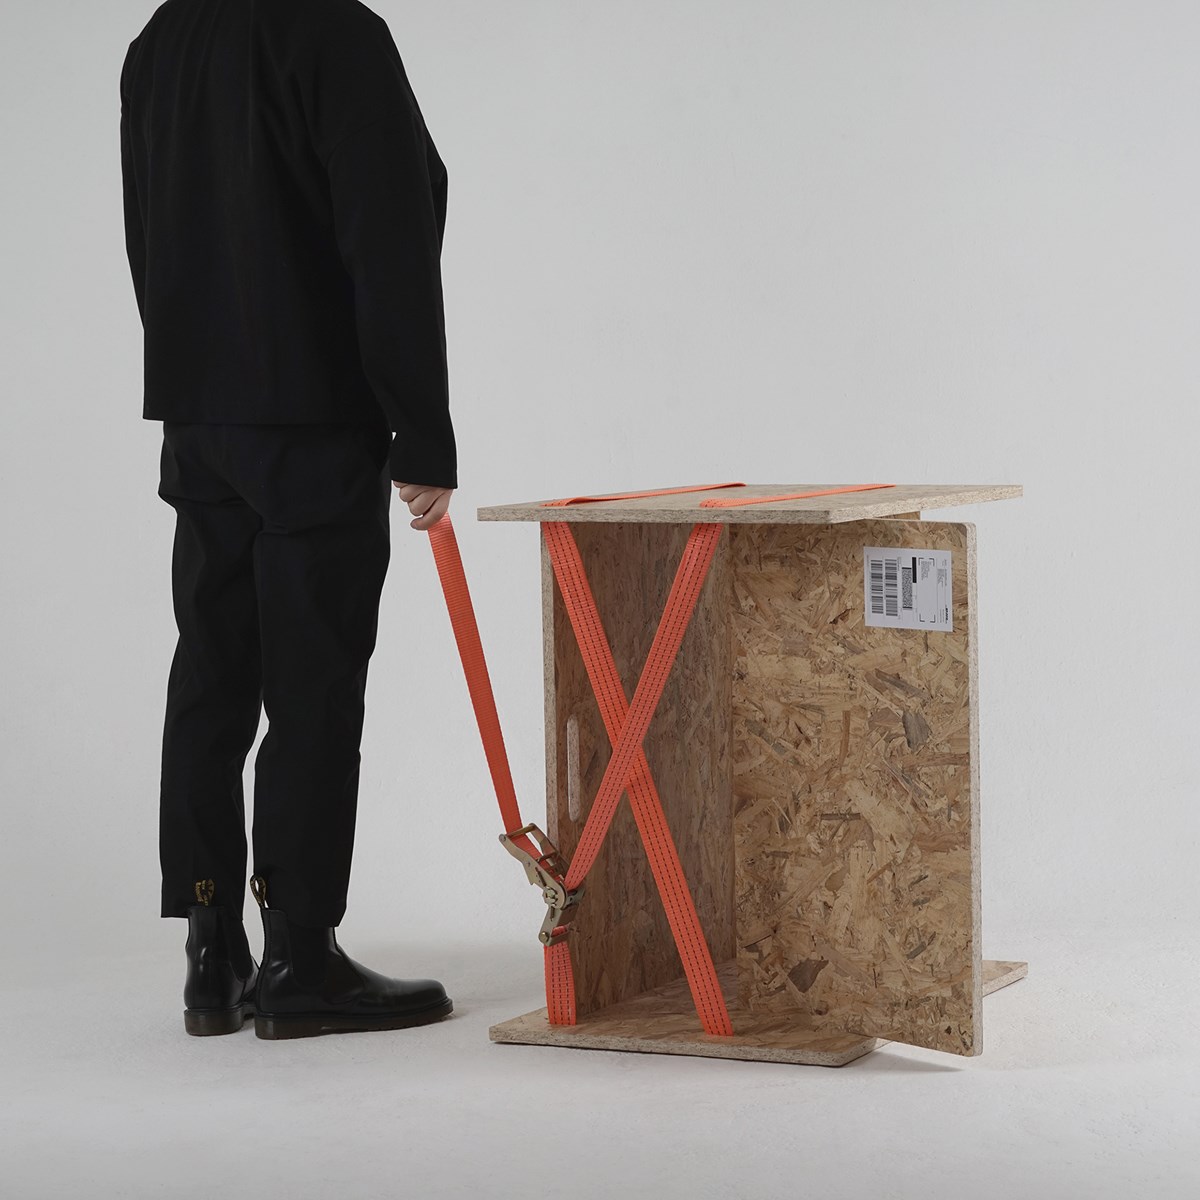 TEMP Chair made of OSB and Cargo Strap by Hoyoung Joo